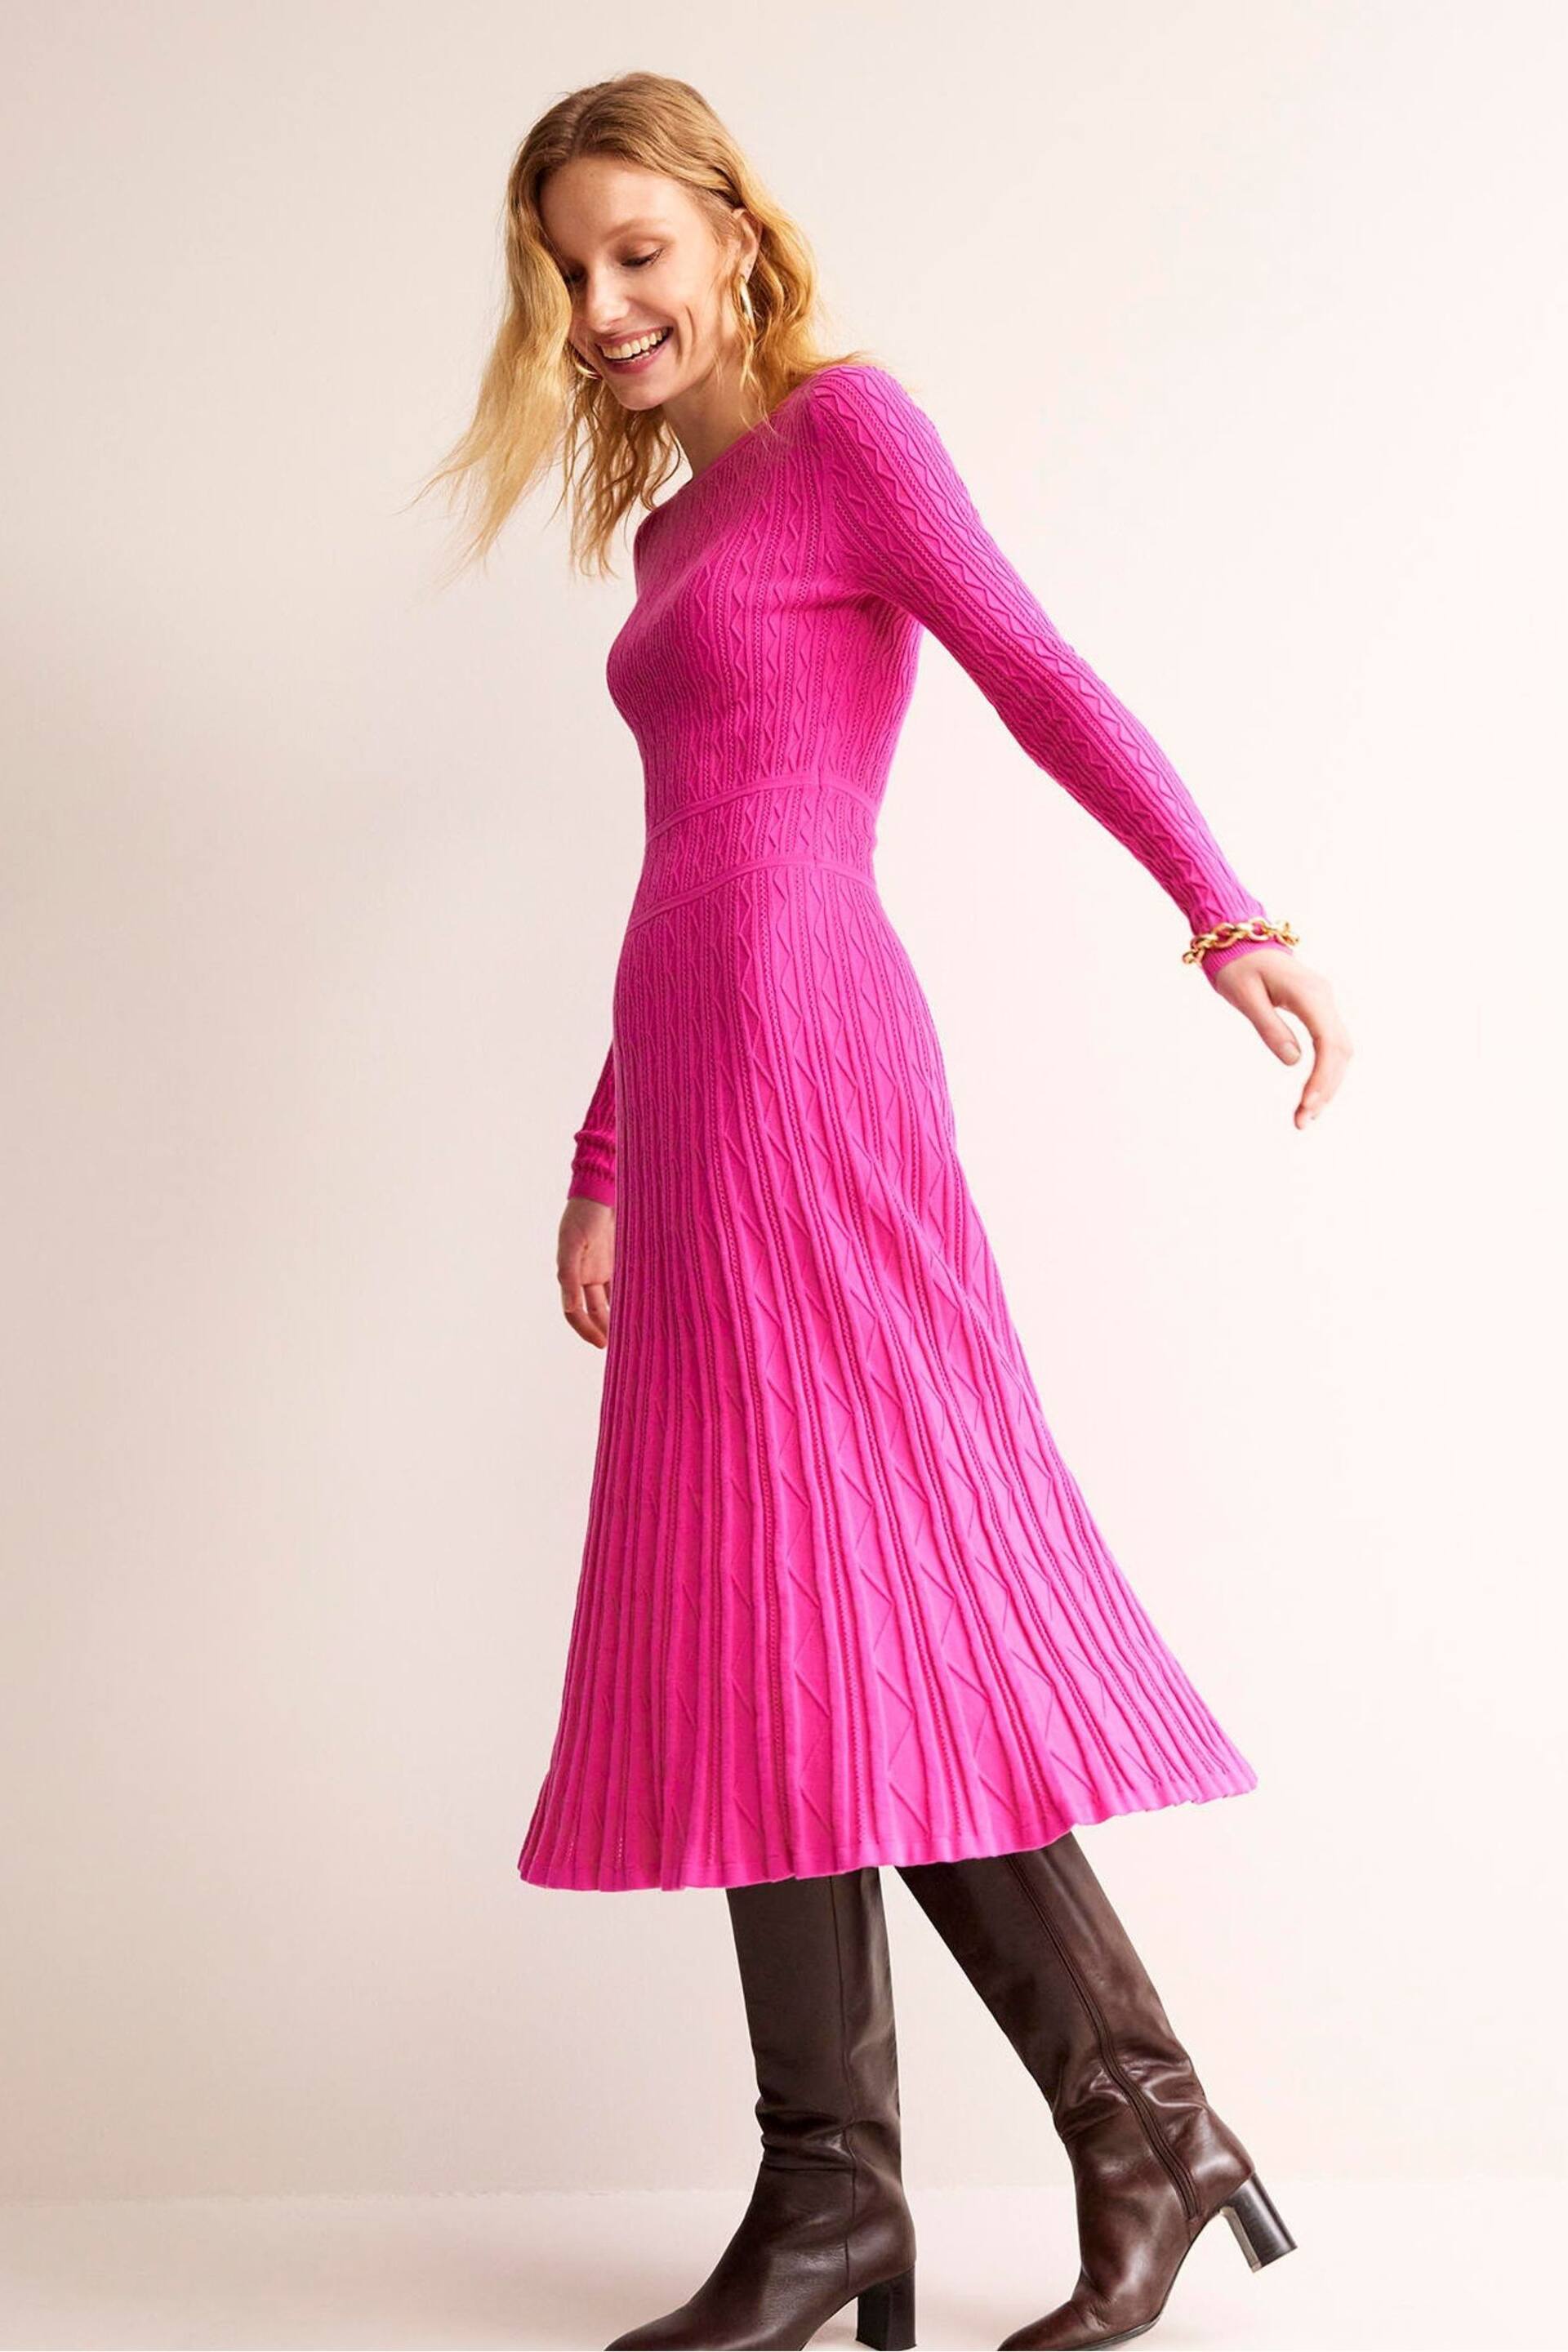 Boden Pink Imogen Empire Knitted Dress - Image 3 of 6